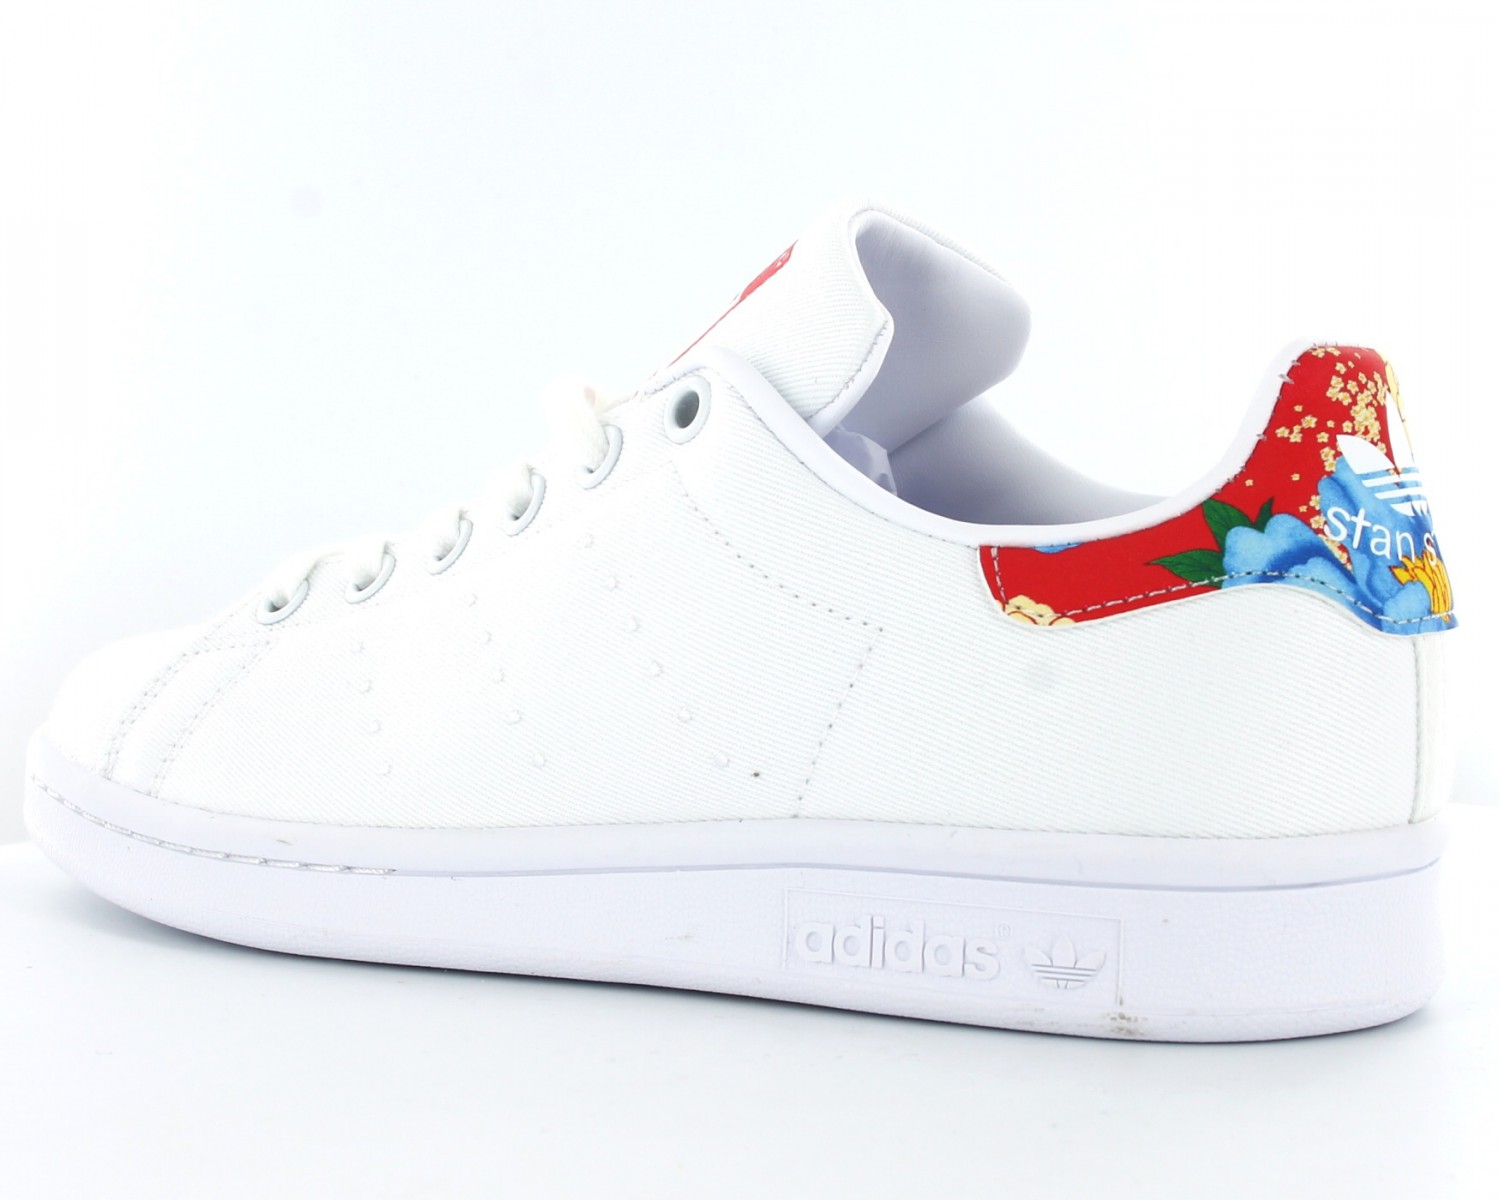 adidas stan smith floral blanche